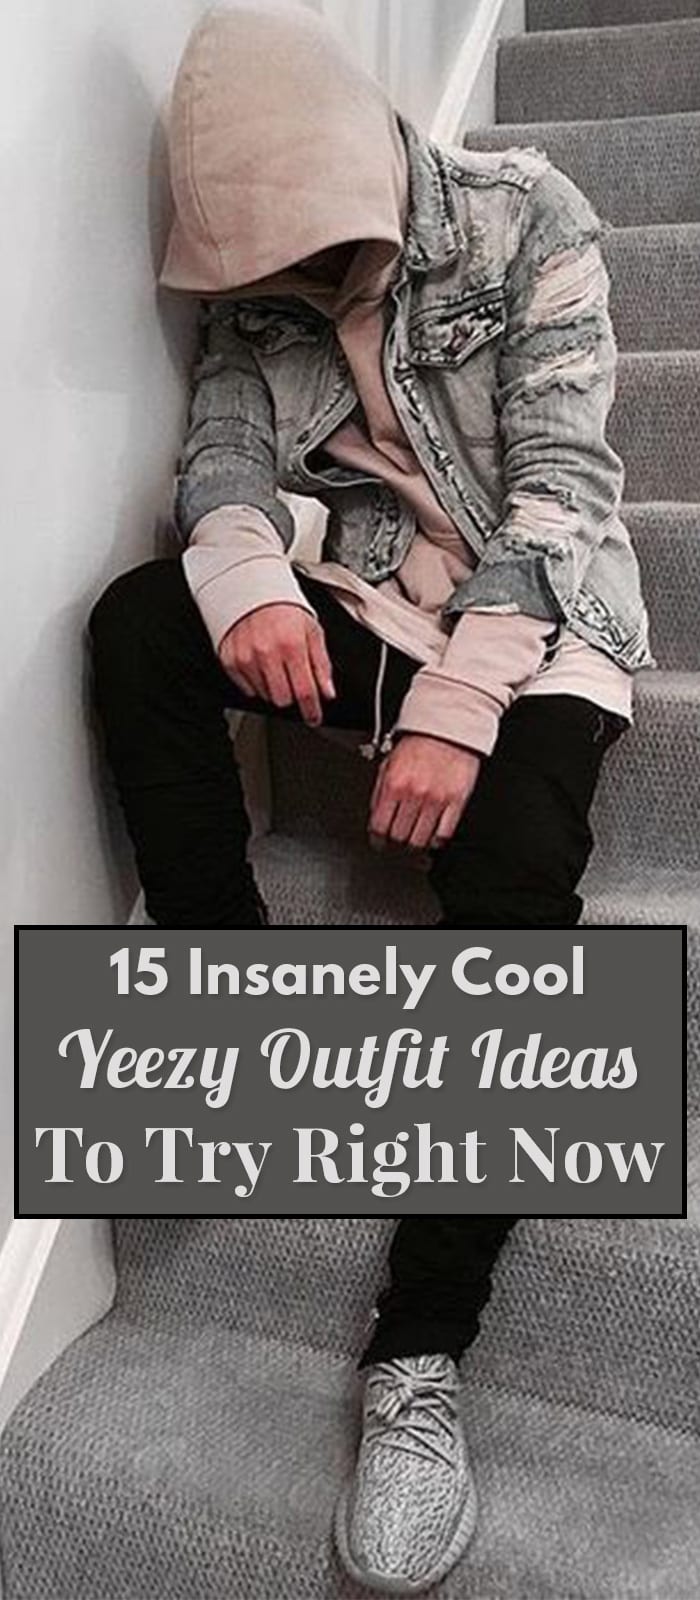 15 Insanely Cool Yeezy Outfit Ideas To Try Right Now.